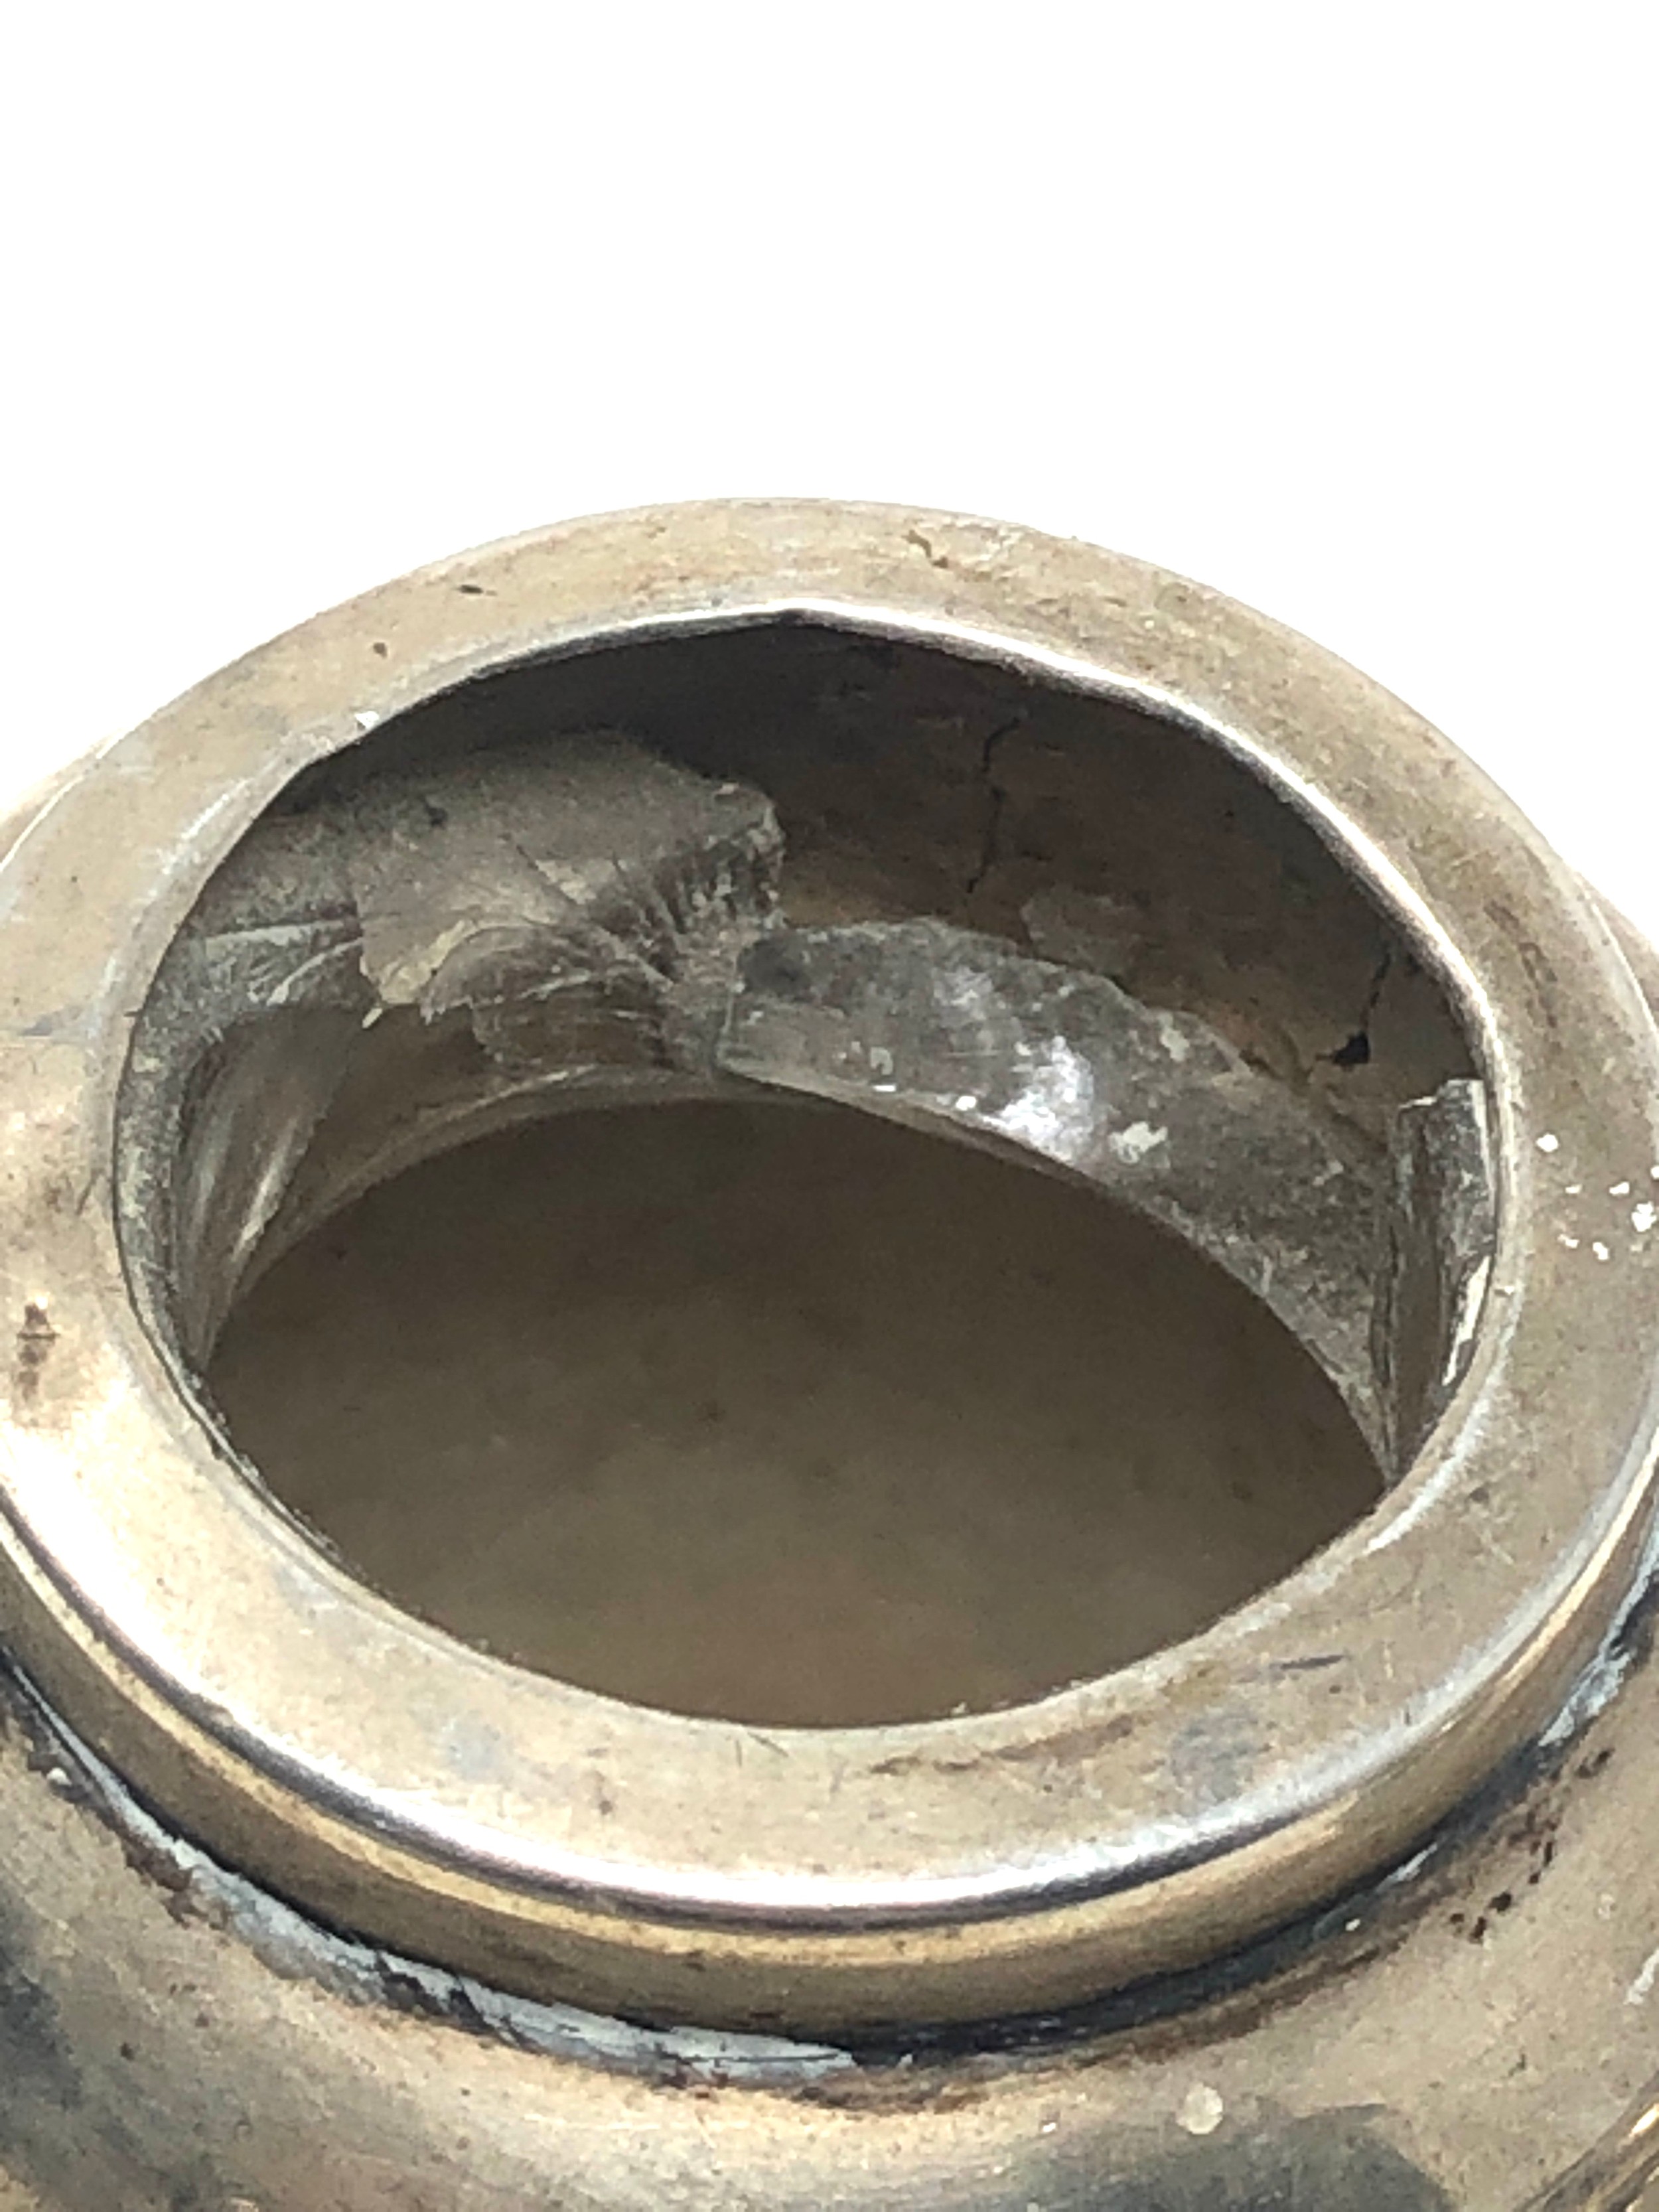 silver scent bottle damage to glass interior as shown - Image 2 of 3